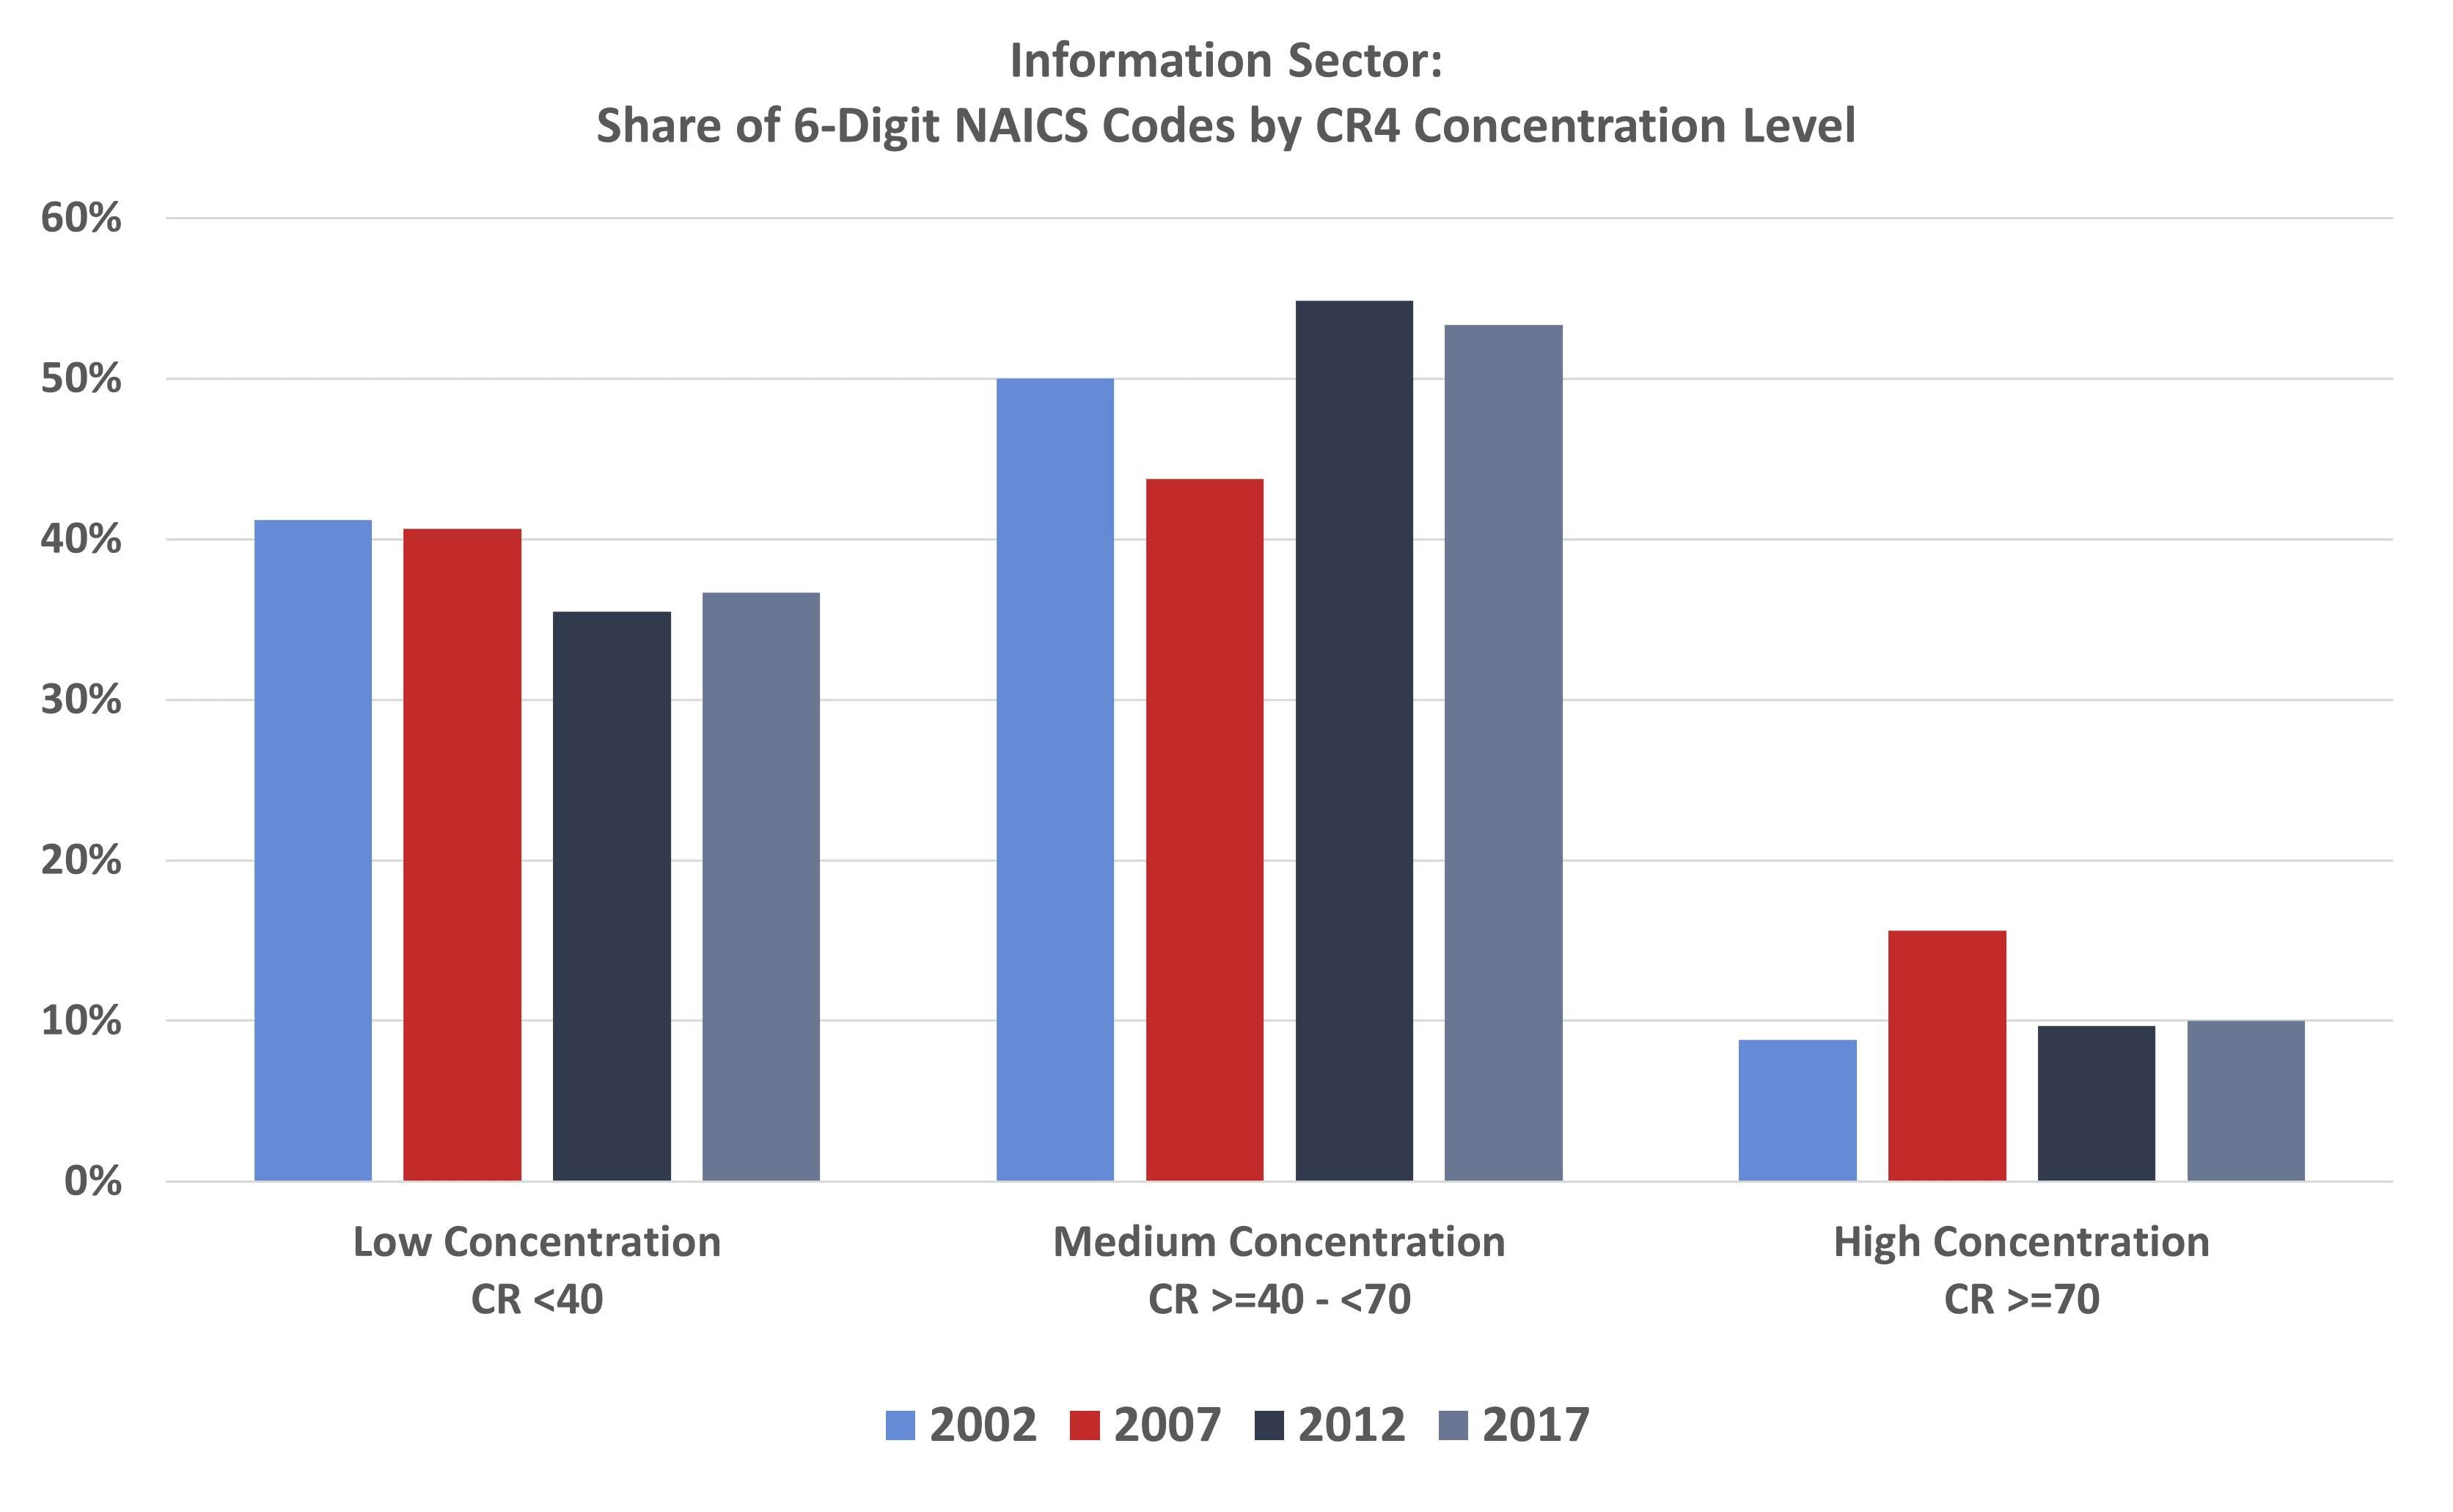 Information Sector: Share of 6-Digit NAICS Codes by CR4 Concentration Level